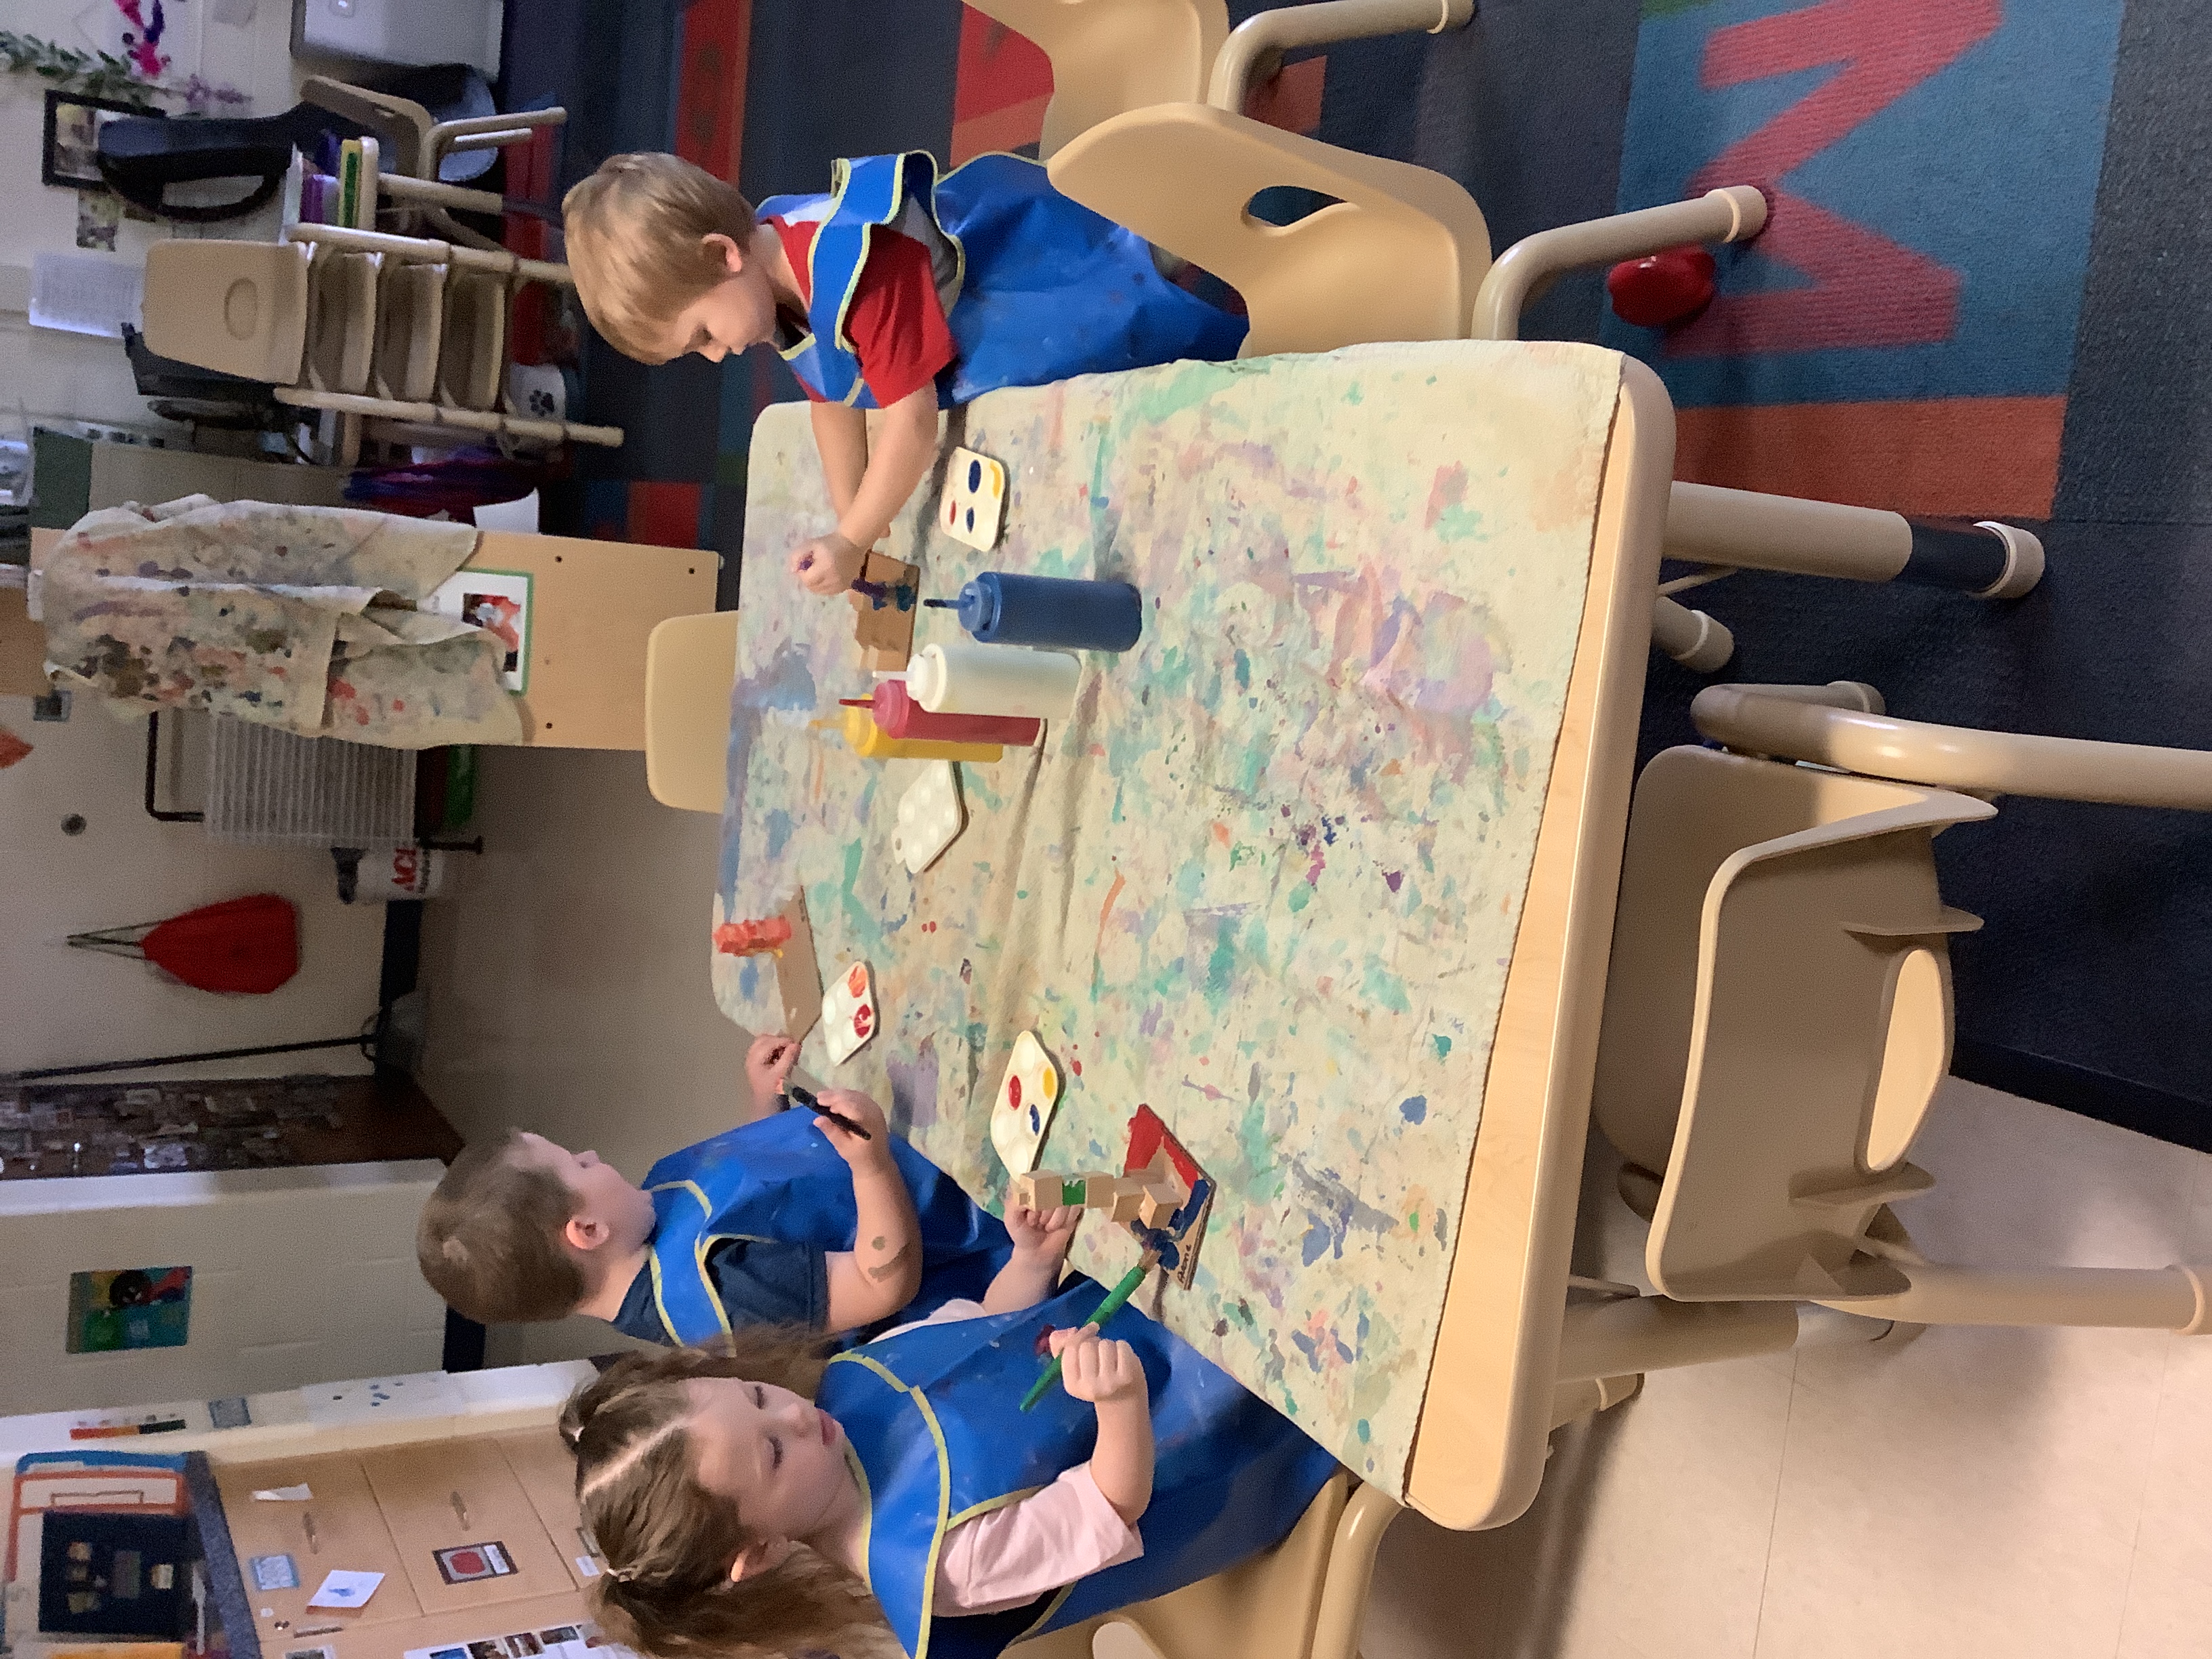 painting at the art table together